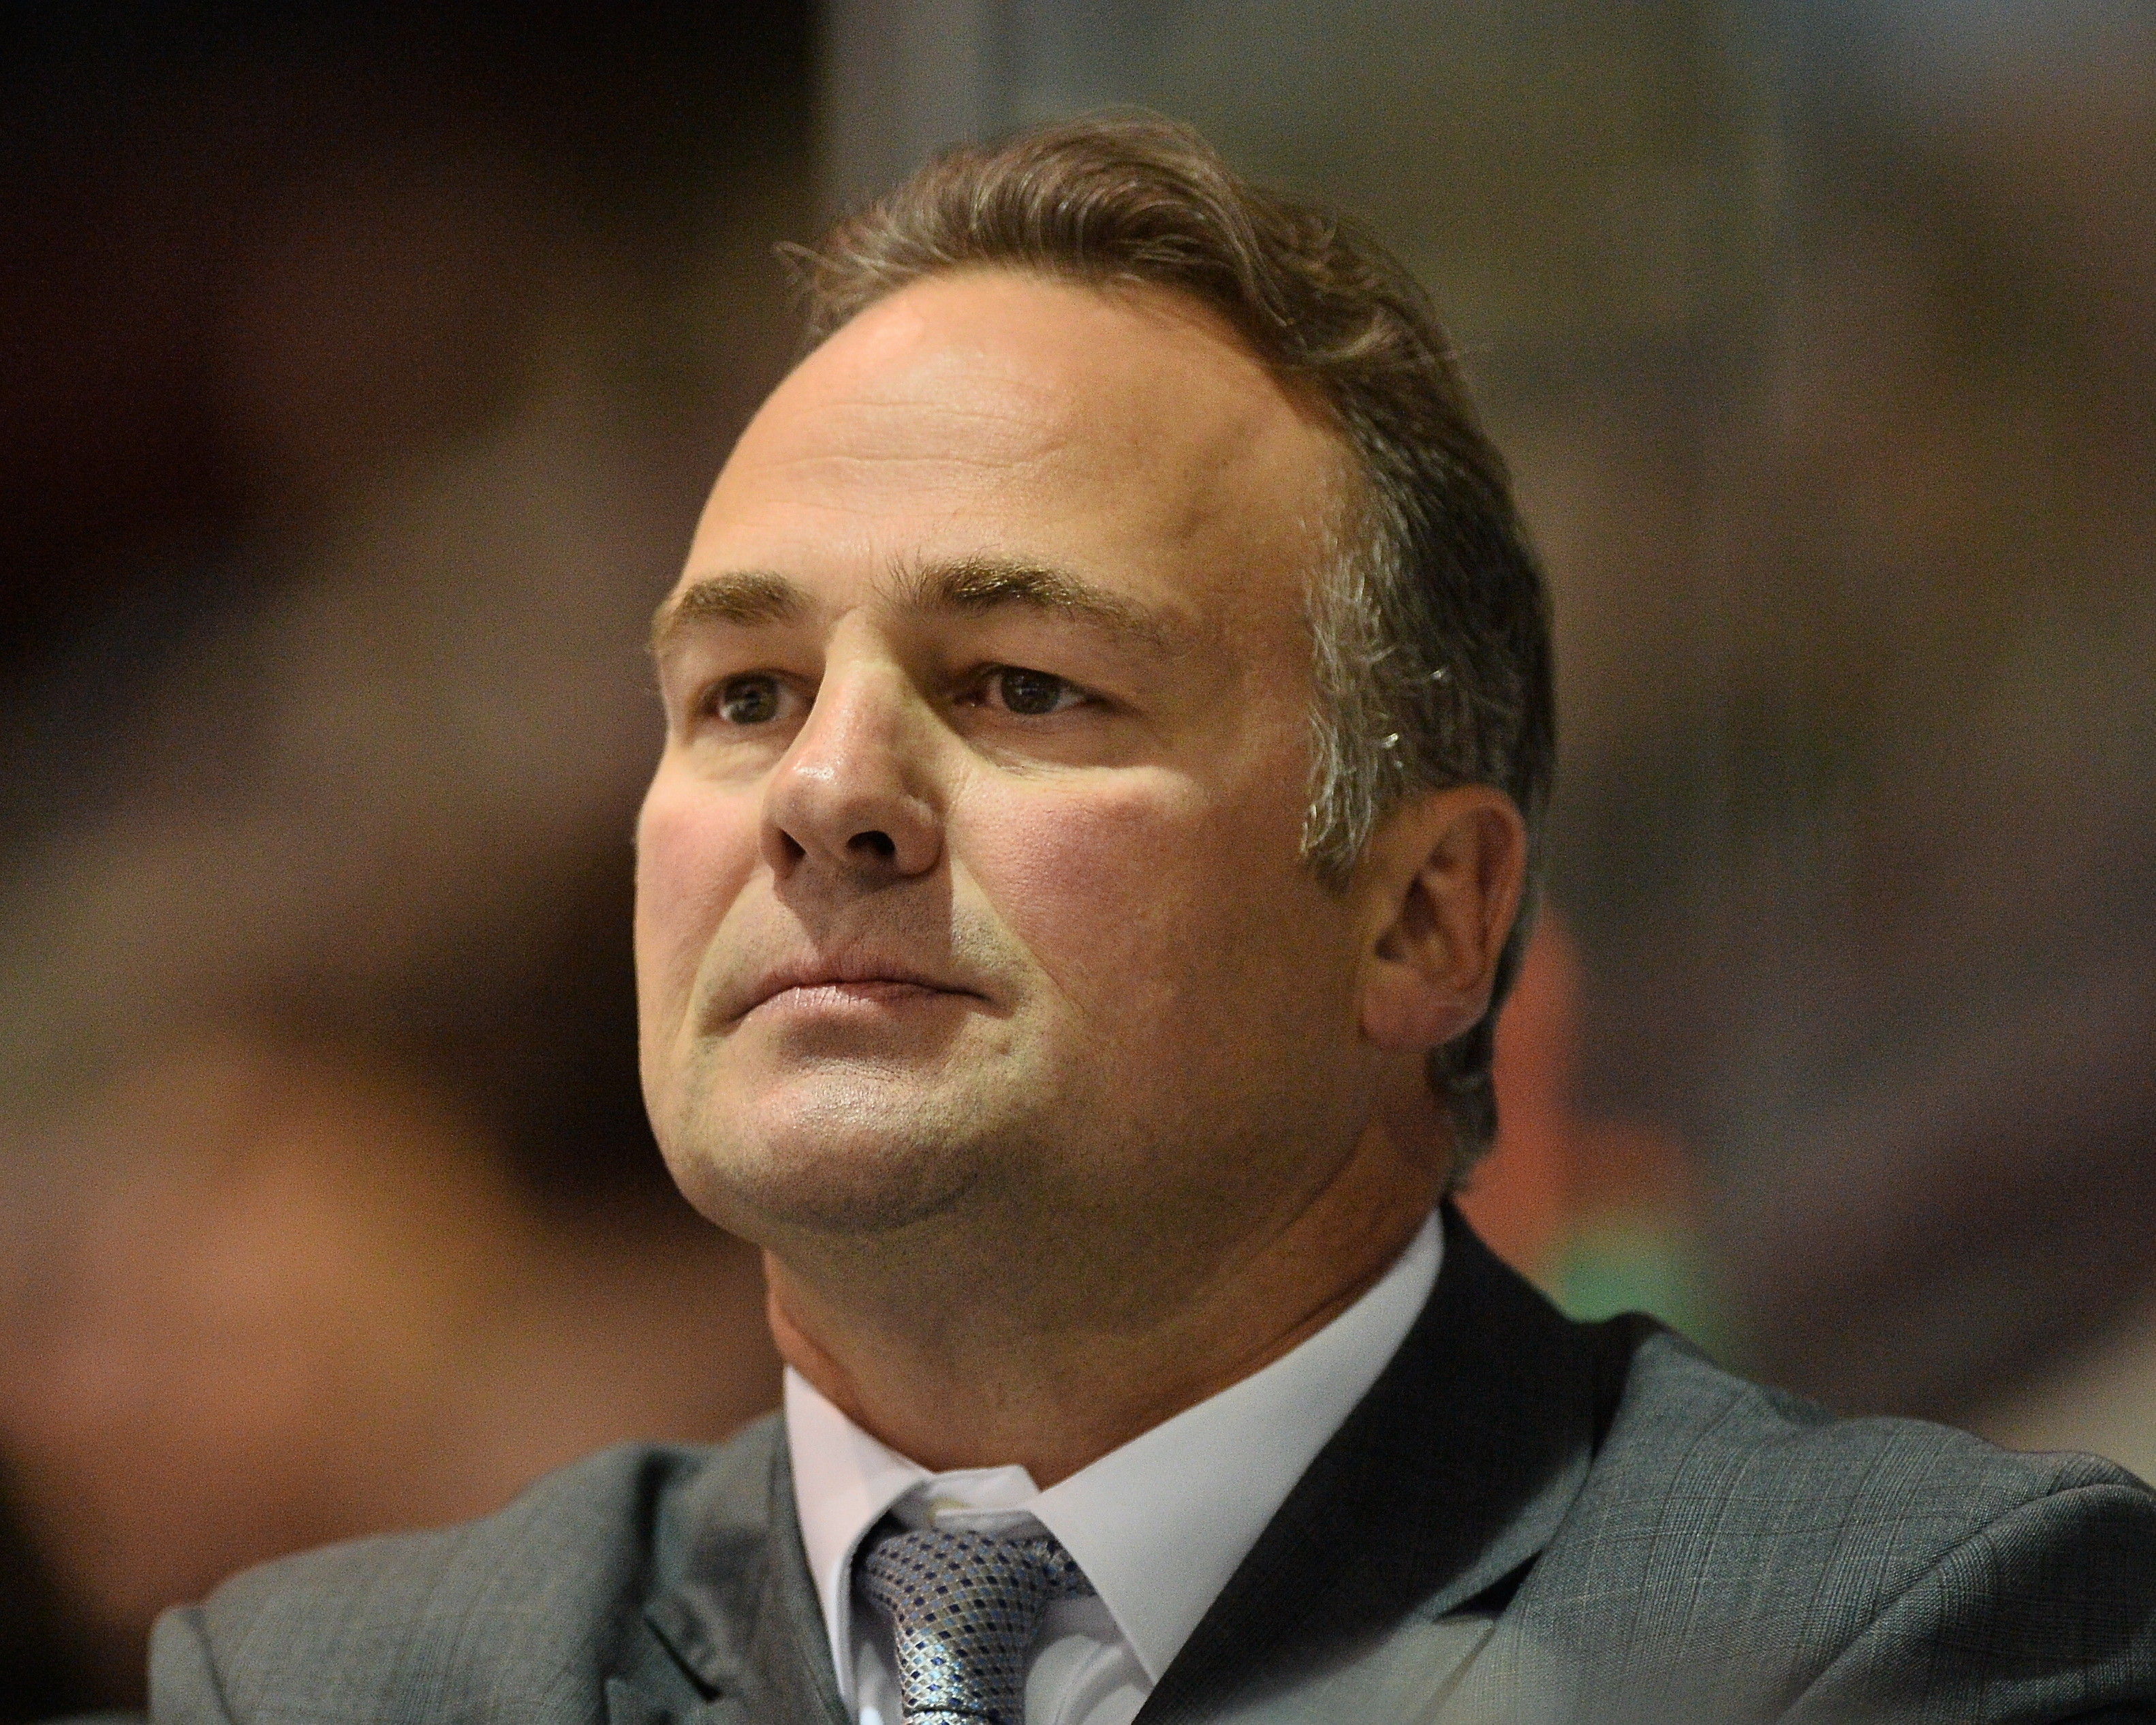 Up Close and Personal with Dale Hawerchuk